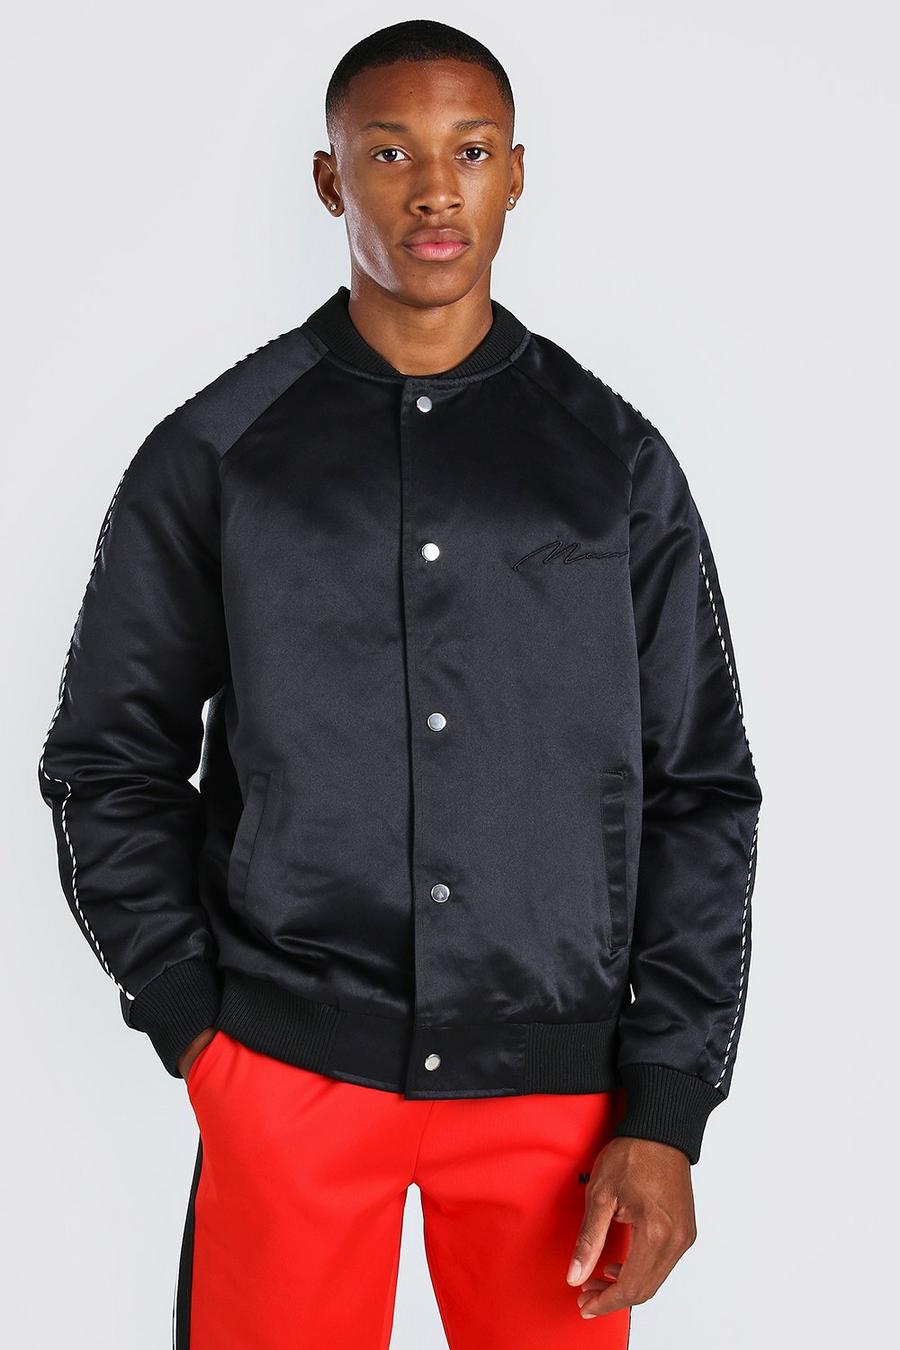 Black Satin Bomber Jacket With Chest Man Embroidery image number 1